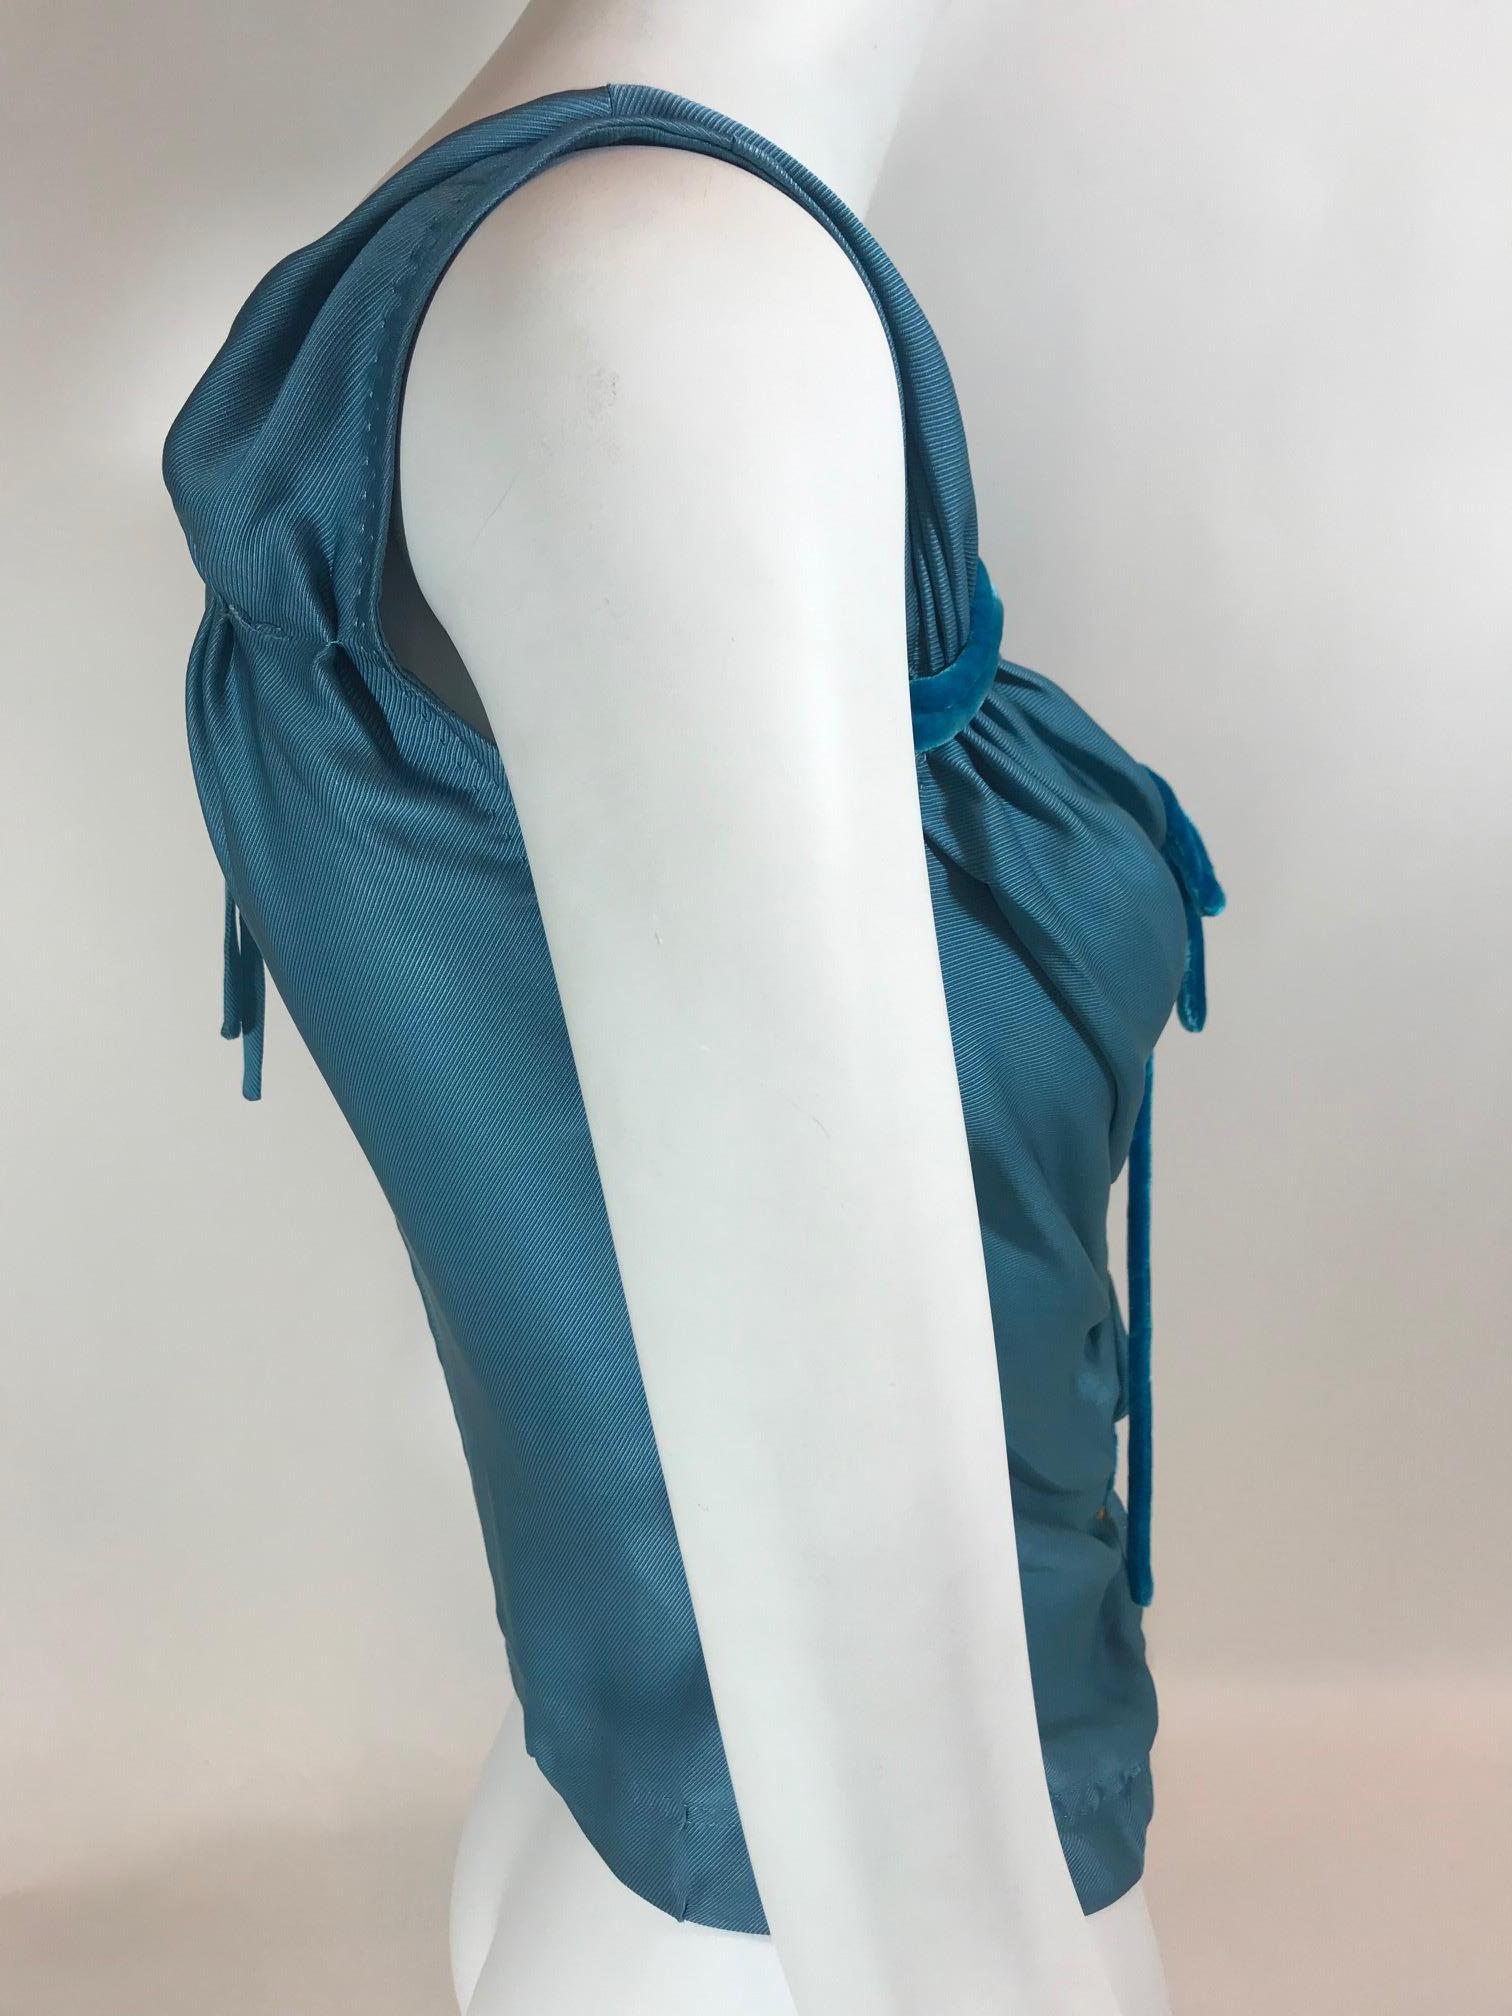 Medium teal blue sleeveless top with V-neck featuring velvet tie accents at front, and zip closure at back.